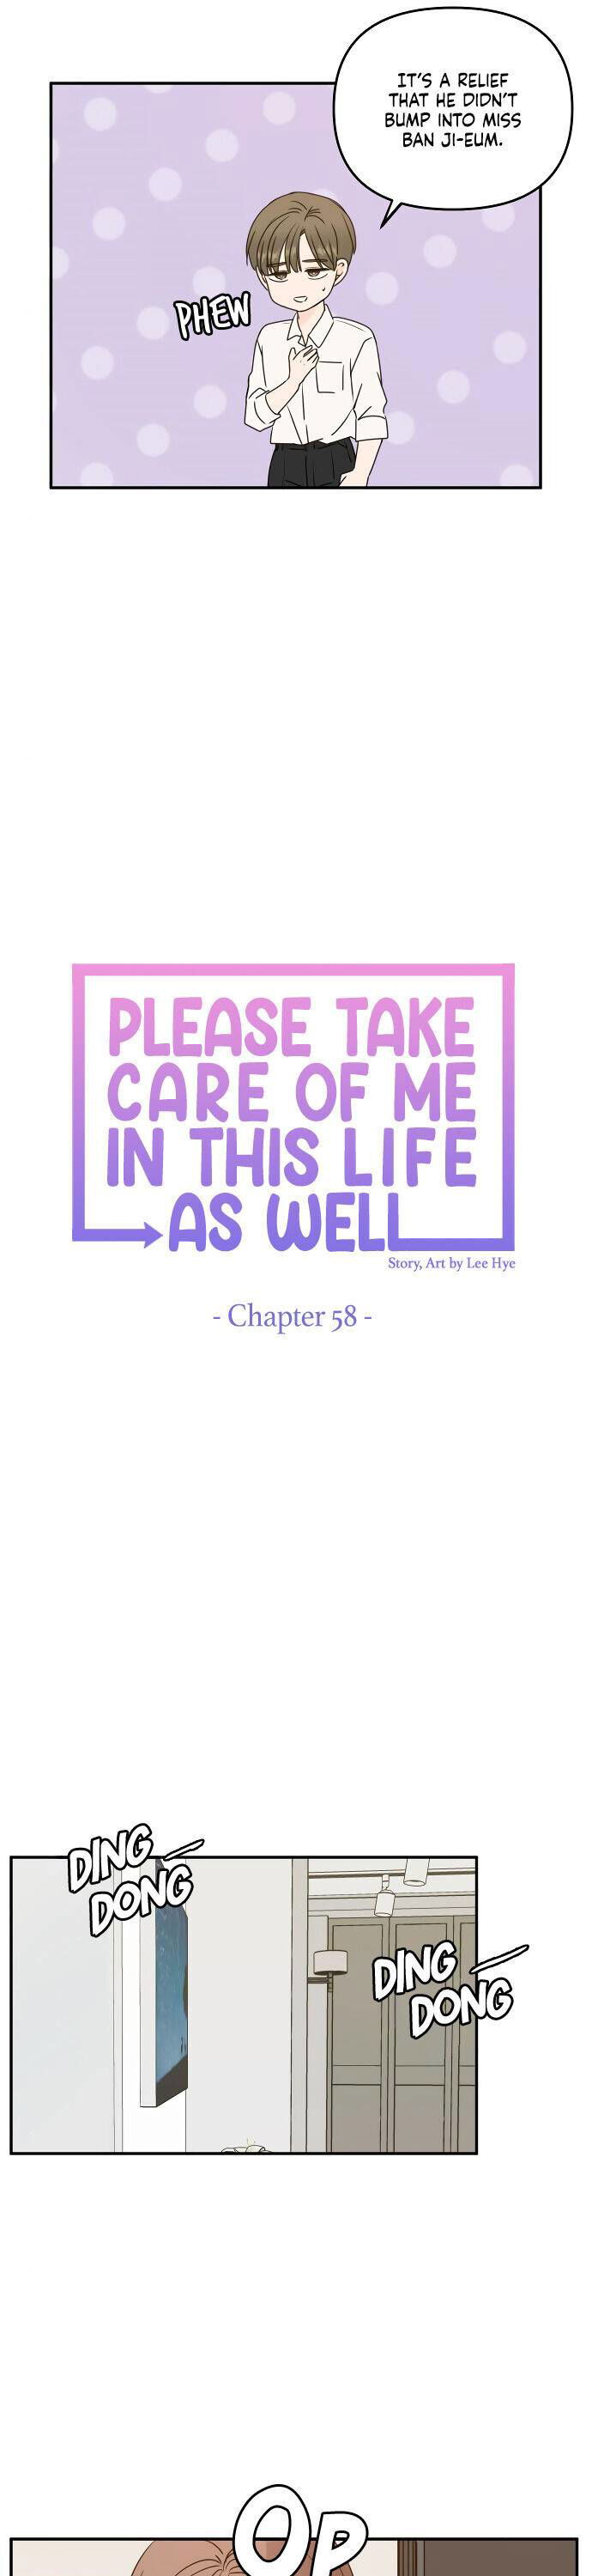 Please Take Care of Me in This Life as Well Chapter 58 page 15